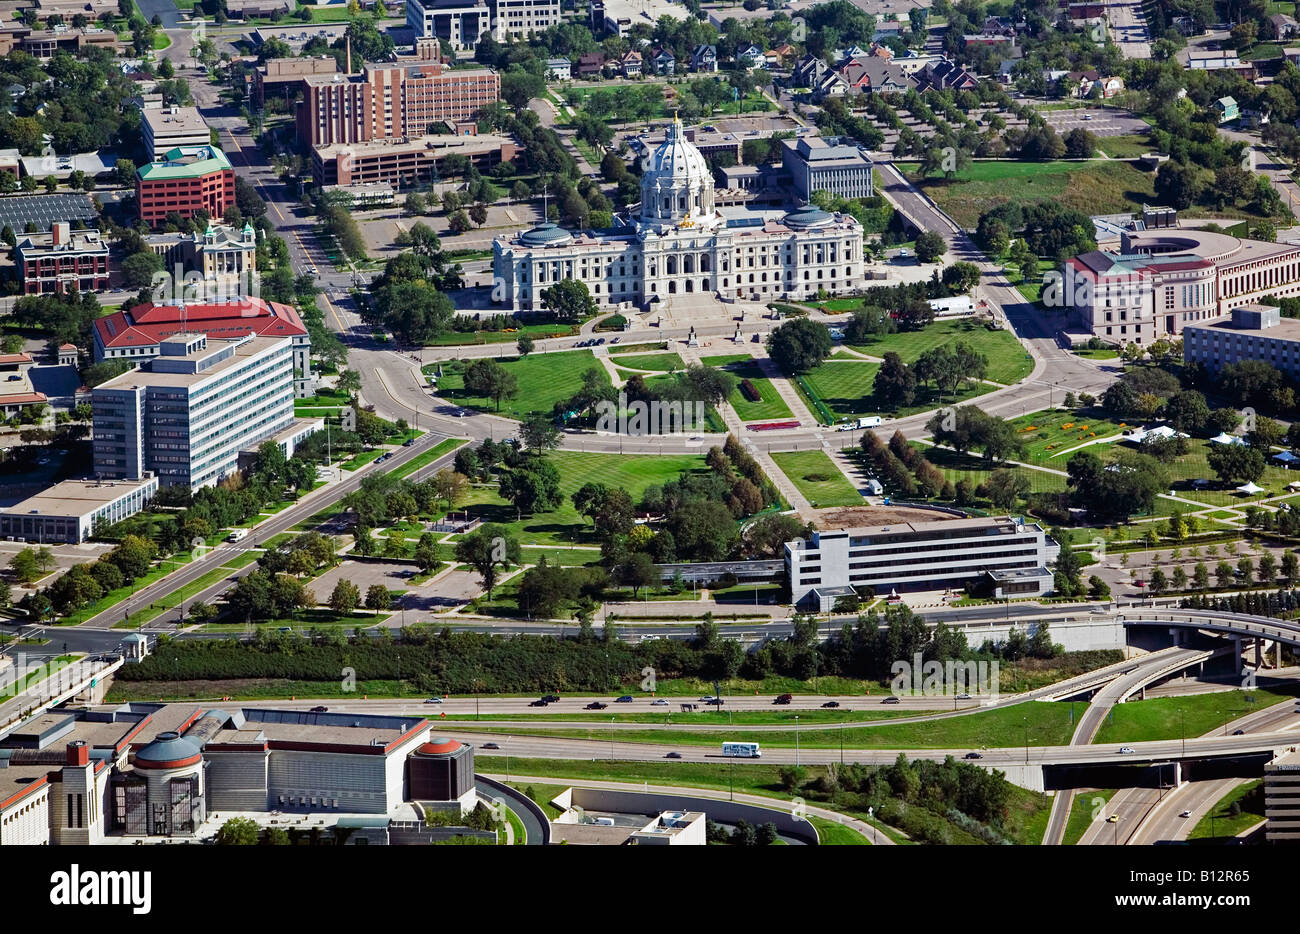 St paul mn hi-res stock photography and images - Alamy